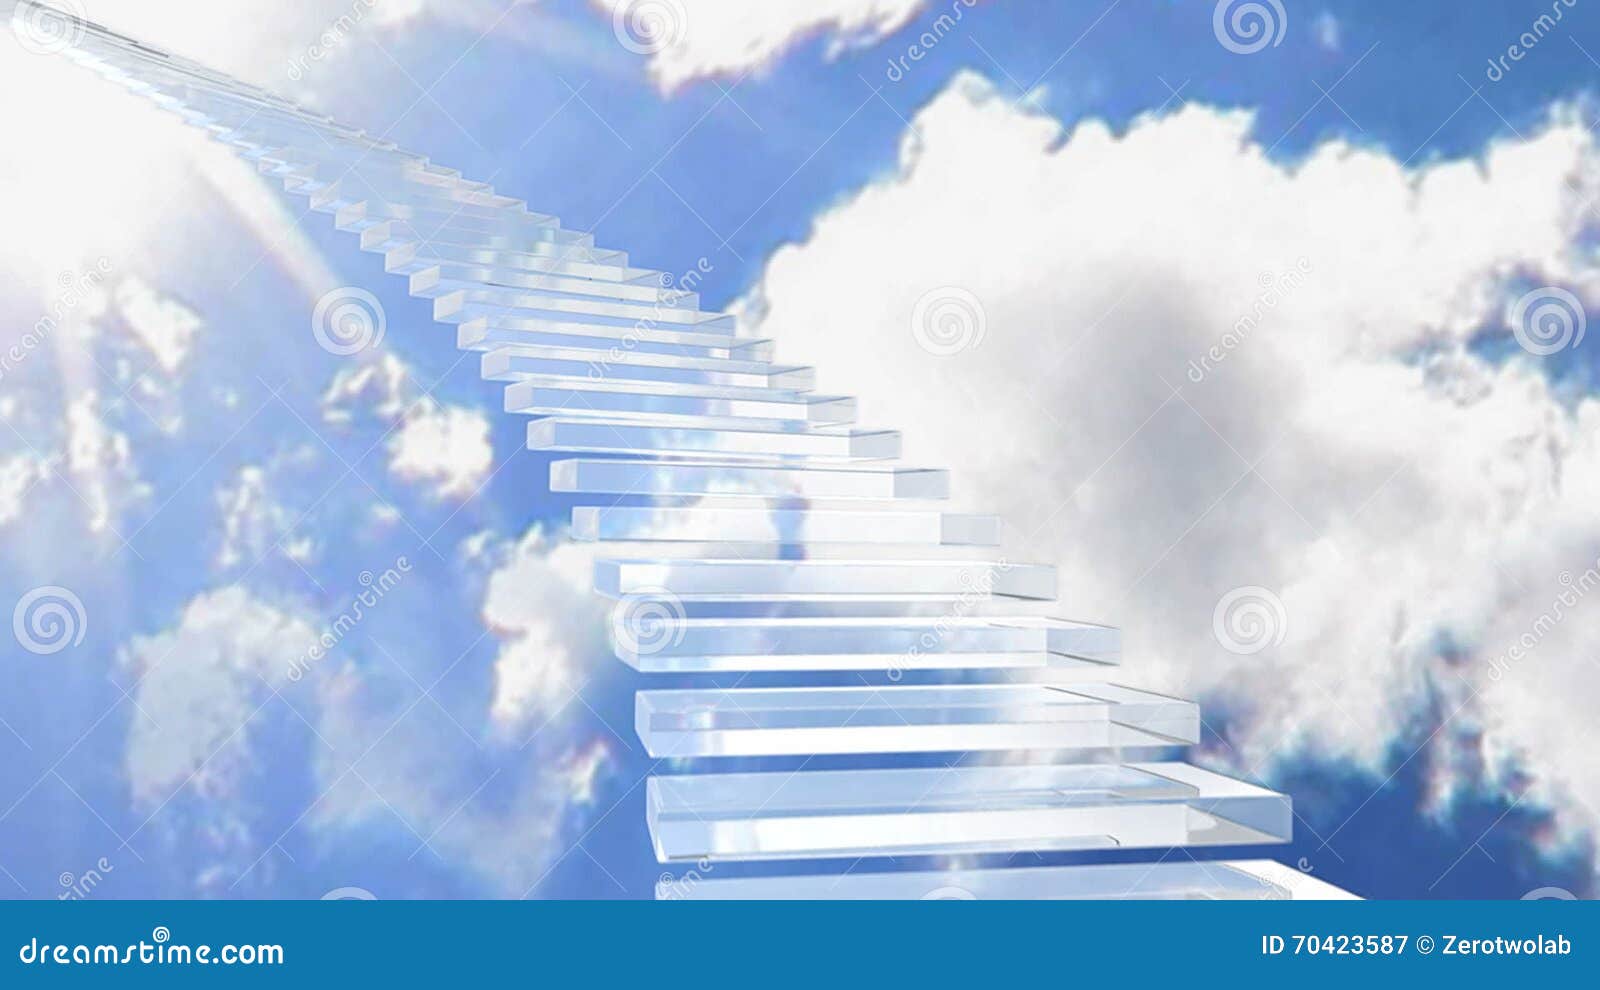 Stairway To Heaven Stock Video Video Of Light Ladder